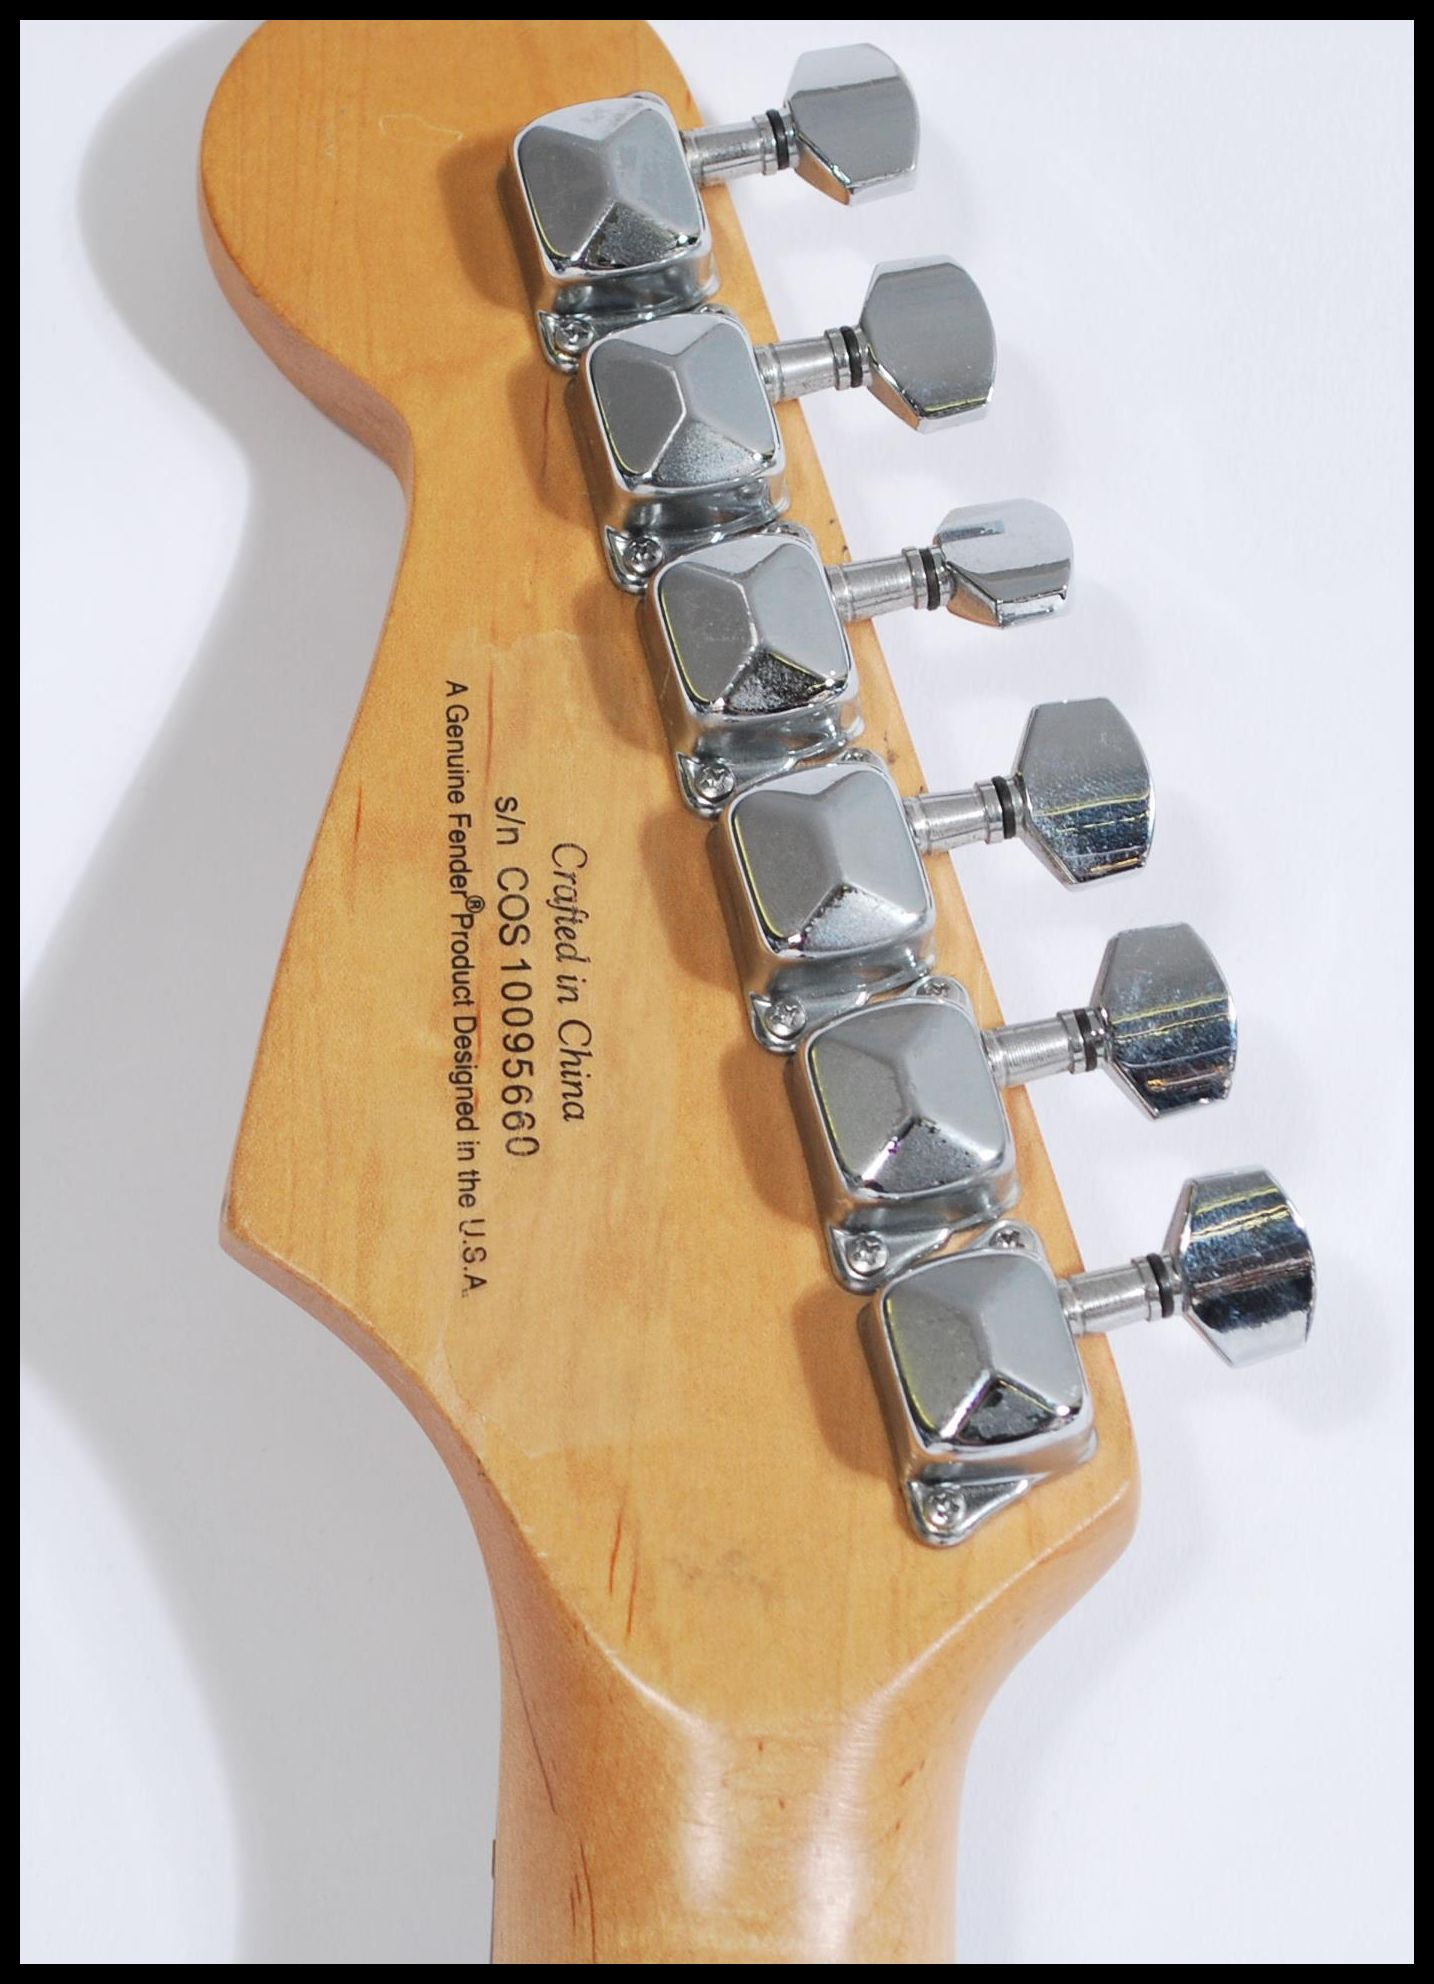 A squire Bullet Strat by Fender Stratocaster six string electric guitar, white body serial number - Image 6 of 6